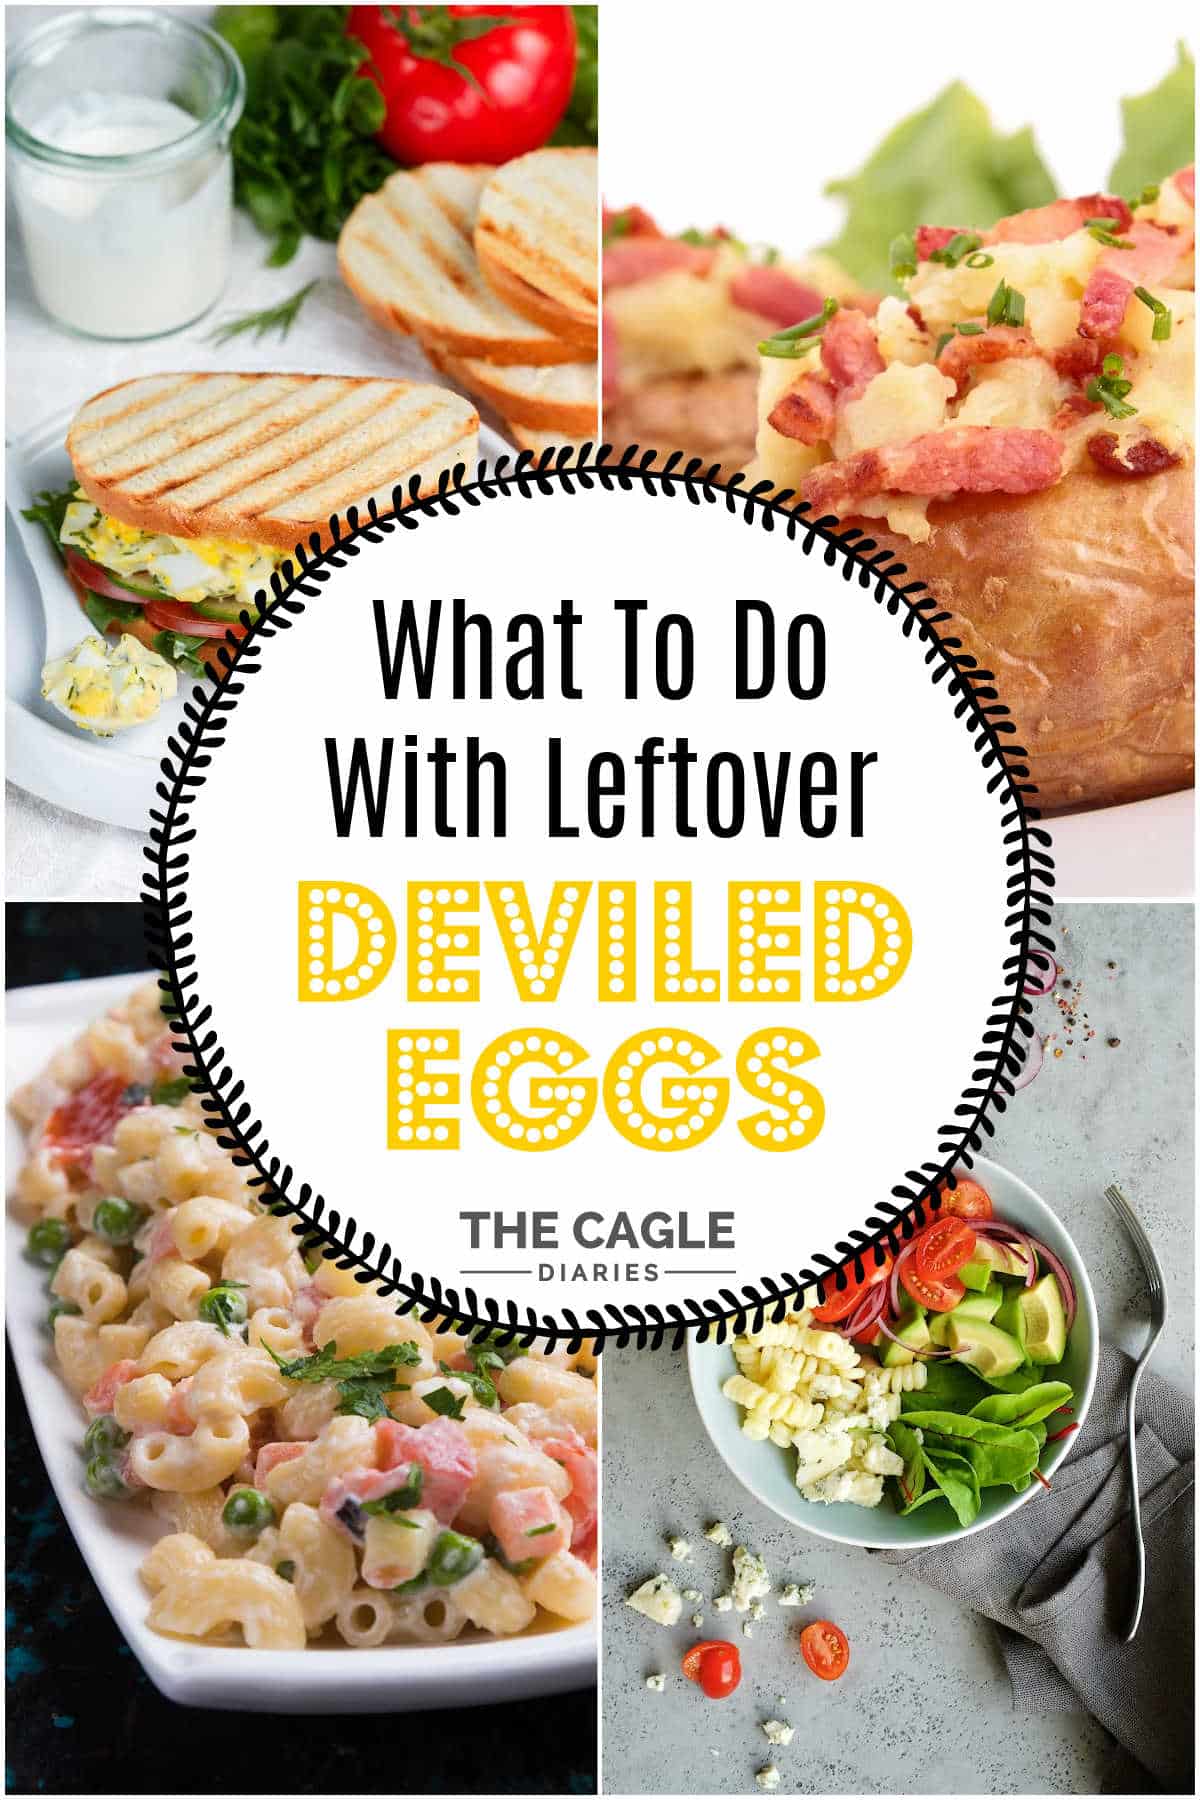 A collage of four images showing ideas on what to do with leftover deviled eggs.